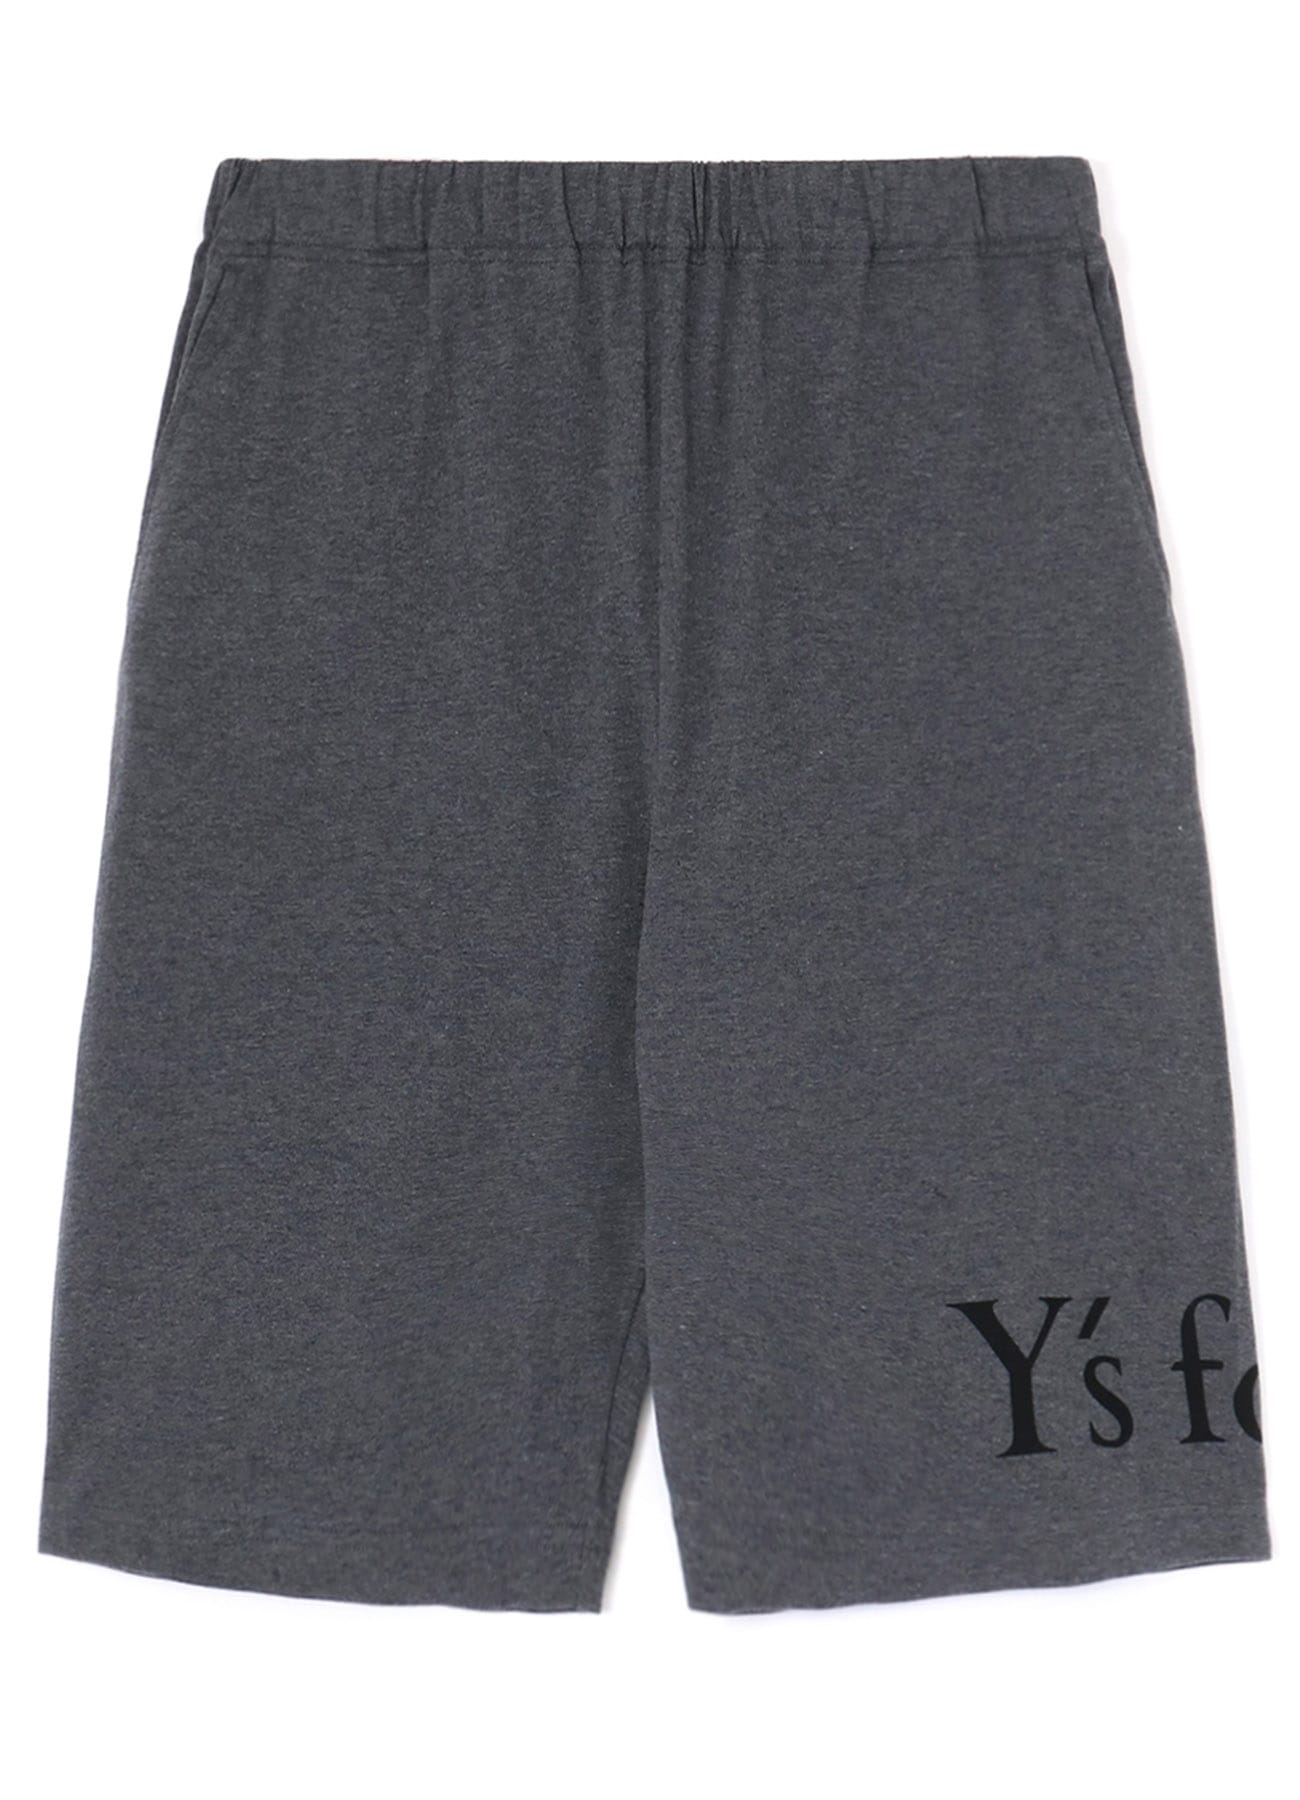 40/2 COTTON JERSEY KNEE-LENGTH PANTS(FREE SIZE Dark Gray): Y's for